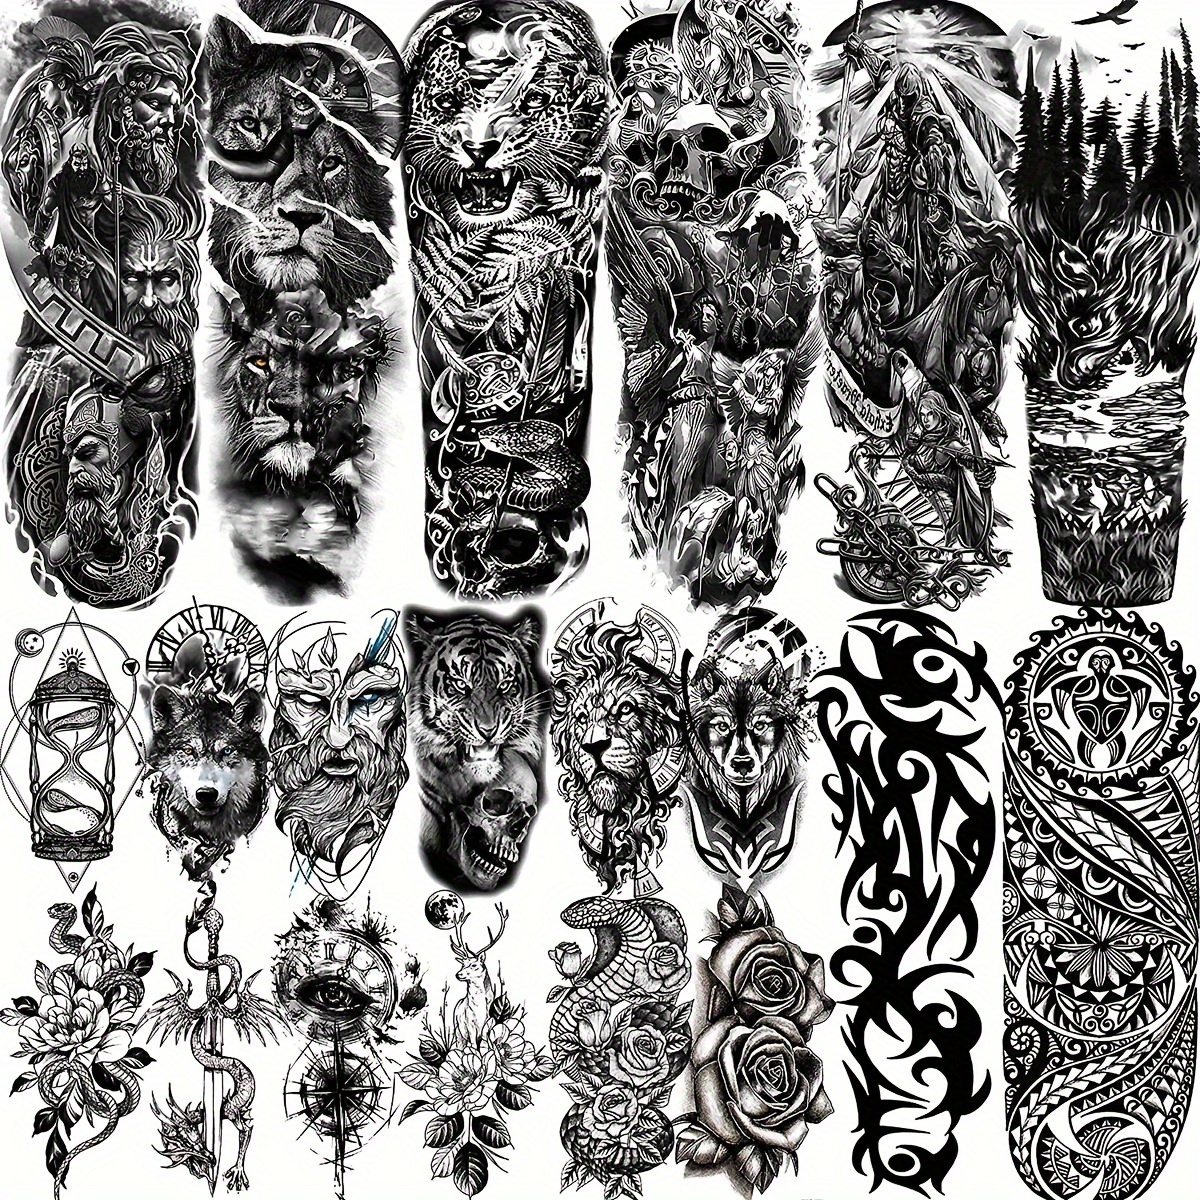 

20 Sheets Extra Large Full Arm Temporary Tattoos For Men Adults, Tiger Snake Leopard Lion King Temporary Tattoos Sleeve For Women, Temp Waterproof Fake Tattoo Stickers Warrior Tattoos